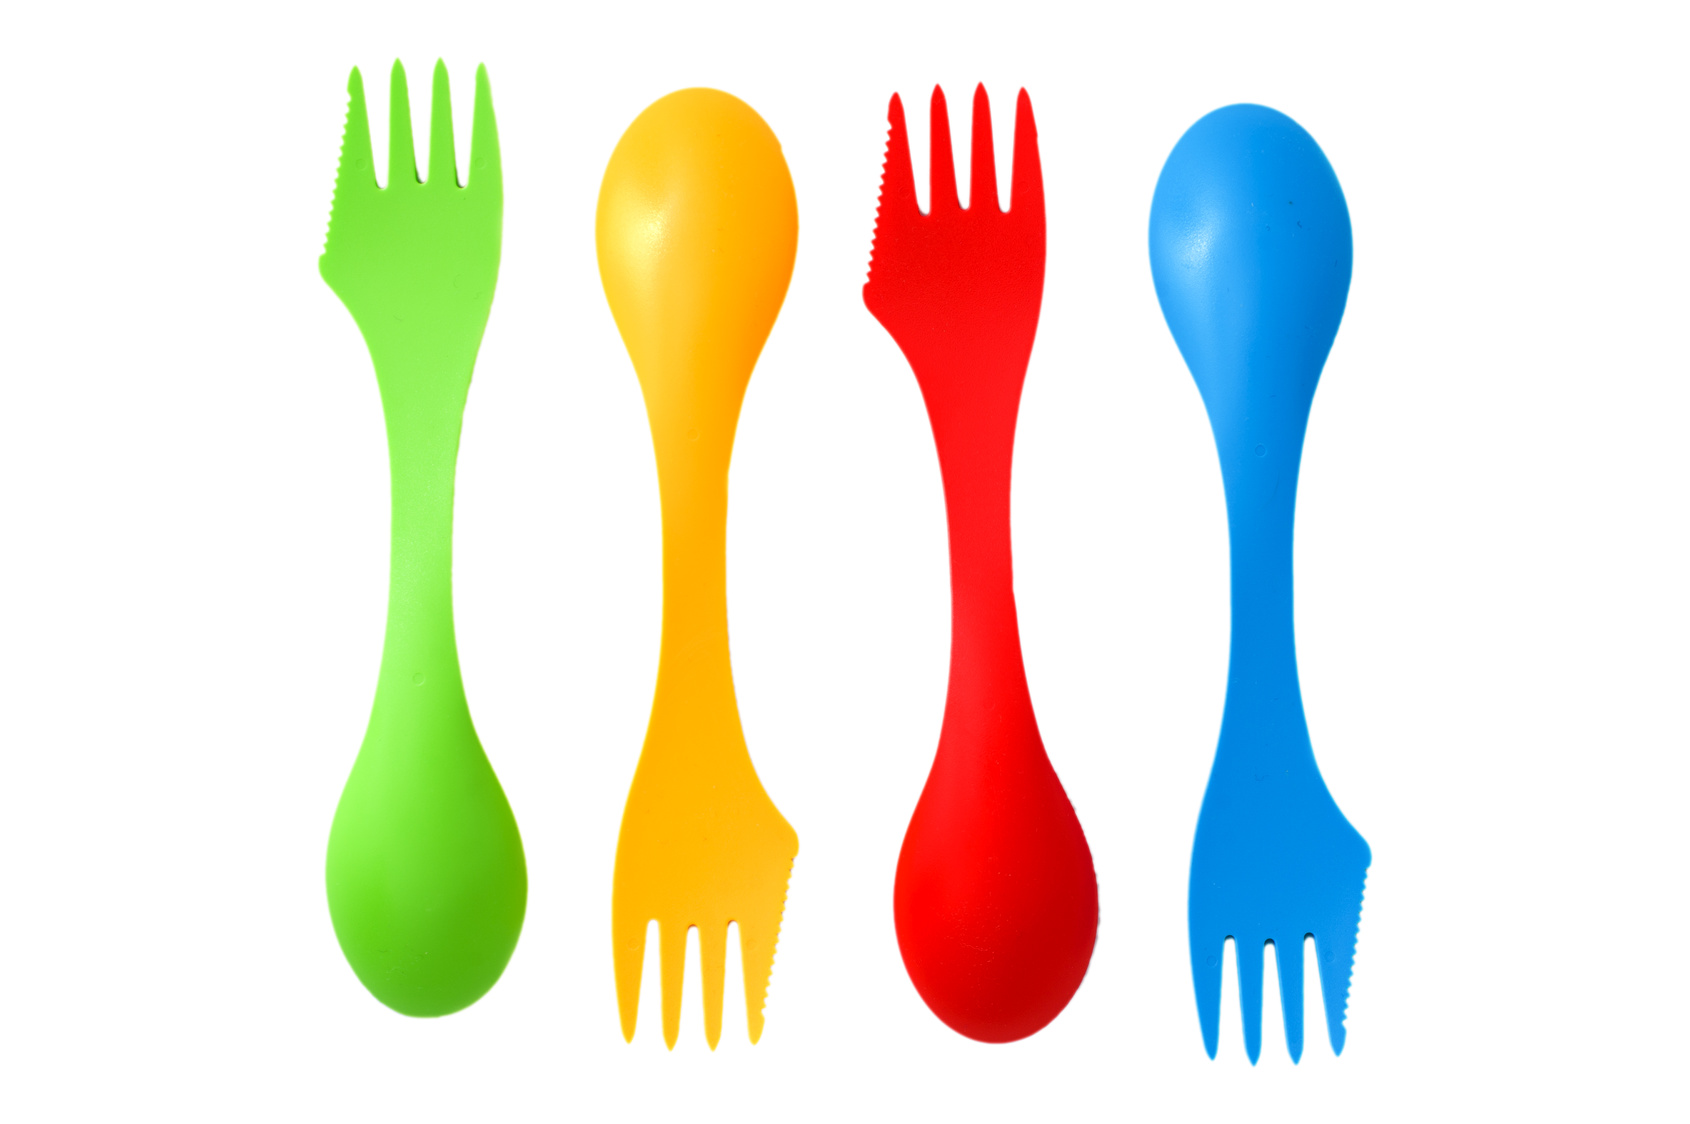 Four plastic varicolored camping cutlery tools spoons and forks